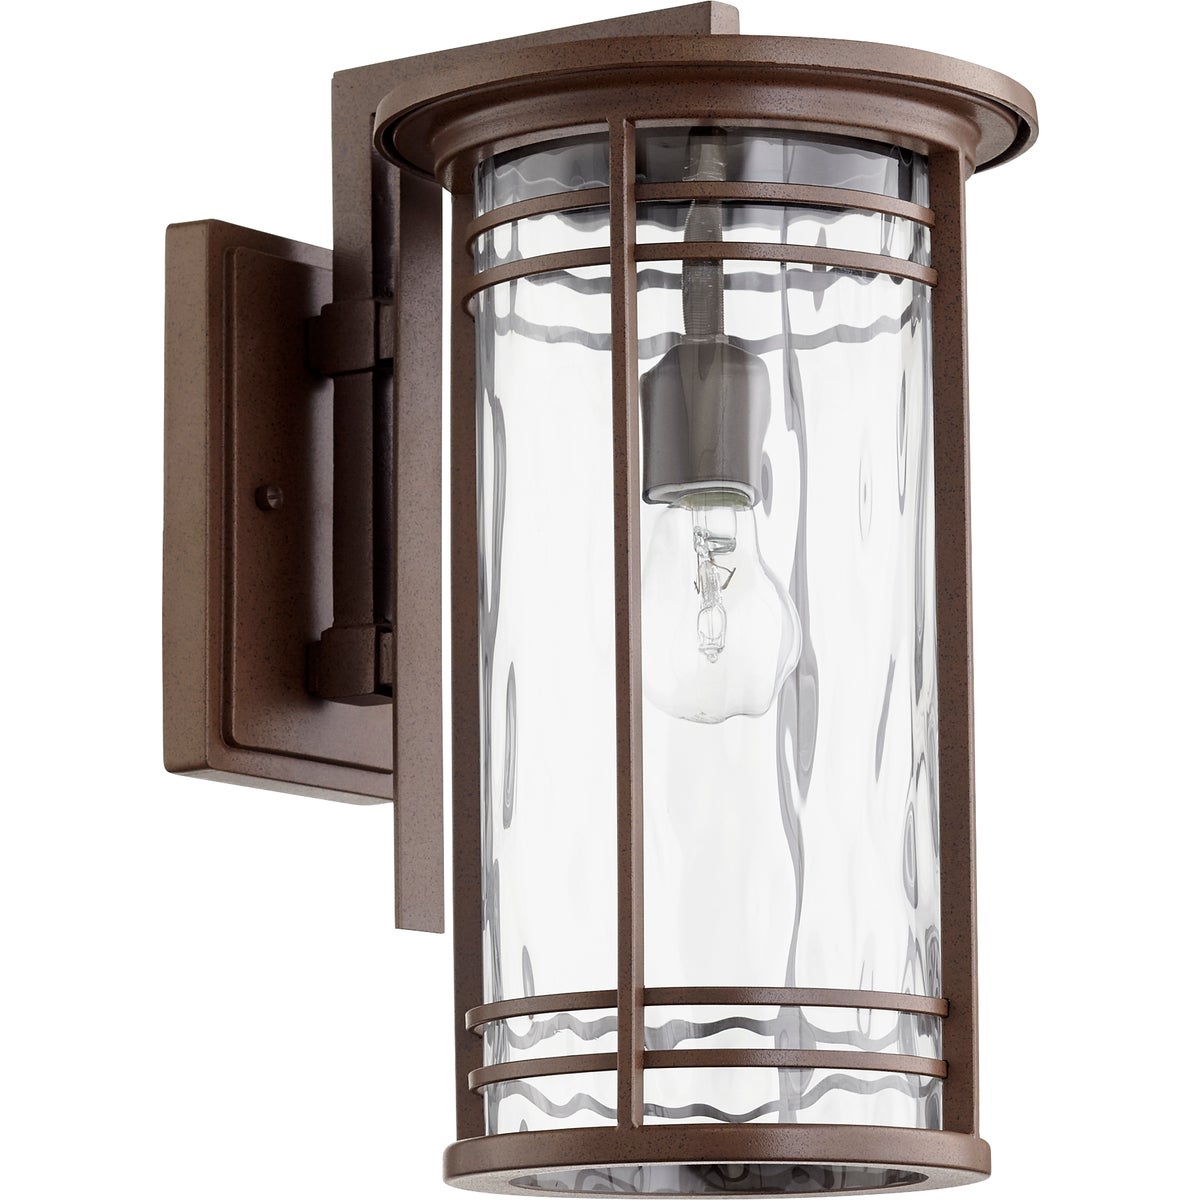 Modern Outdoor Wall Light with clear glass cylinder shade, oiled bronze finish. Clean-lined elongated drum silhouette. UL Listed, Wet Location. 9.25"W x 16.25"H x 12.25"E. 100W, 120V, Medium E26 base. Dimmable. 2-year warranty. Stars and Stripes Lighting.